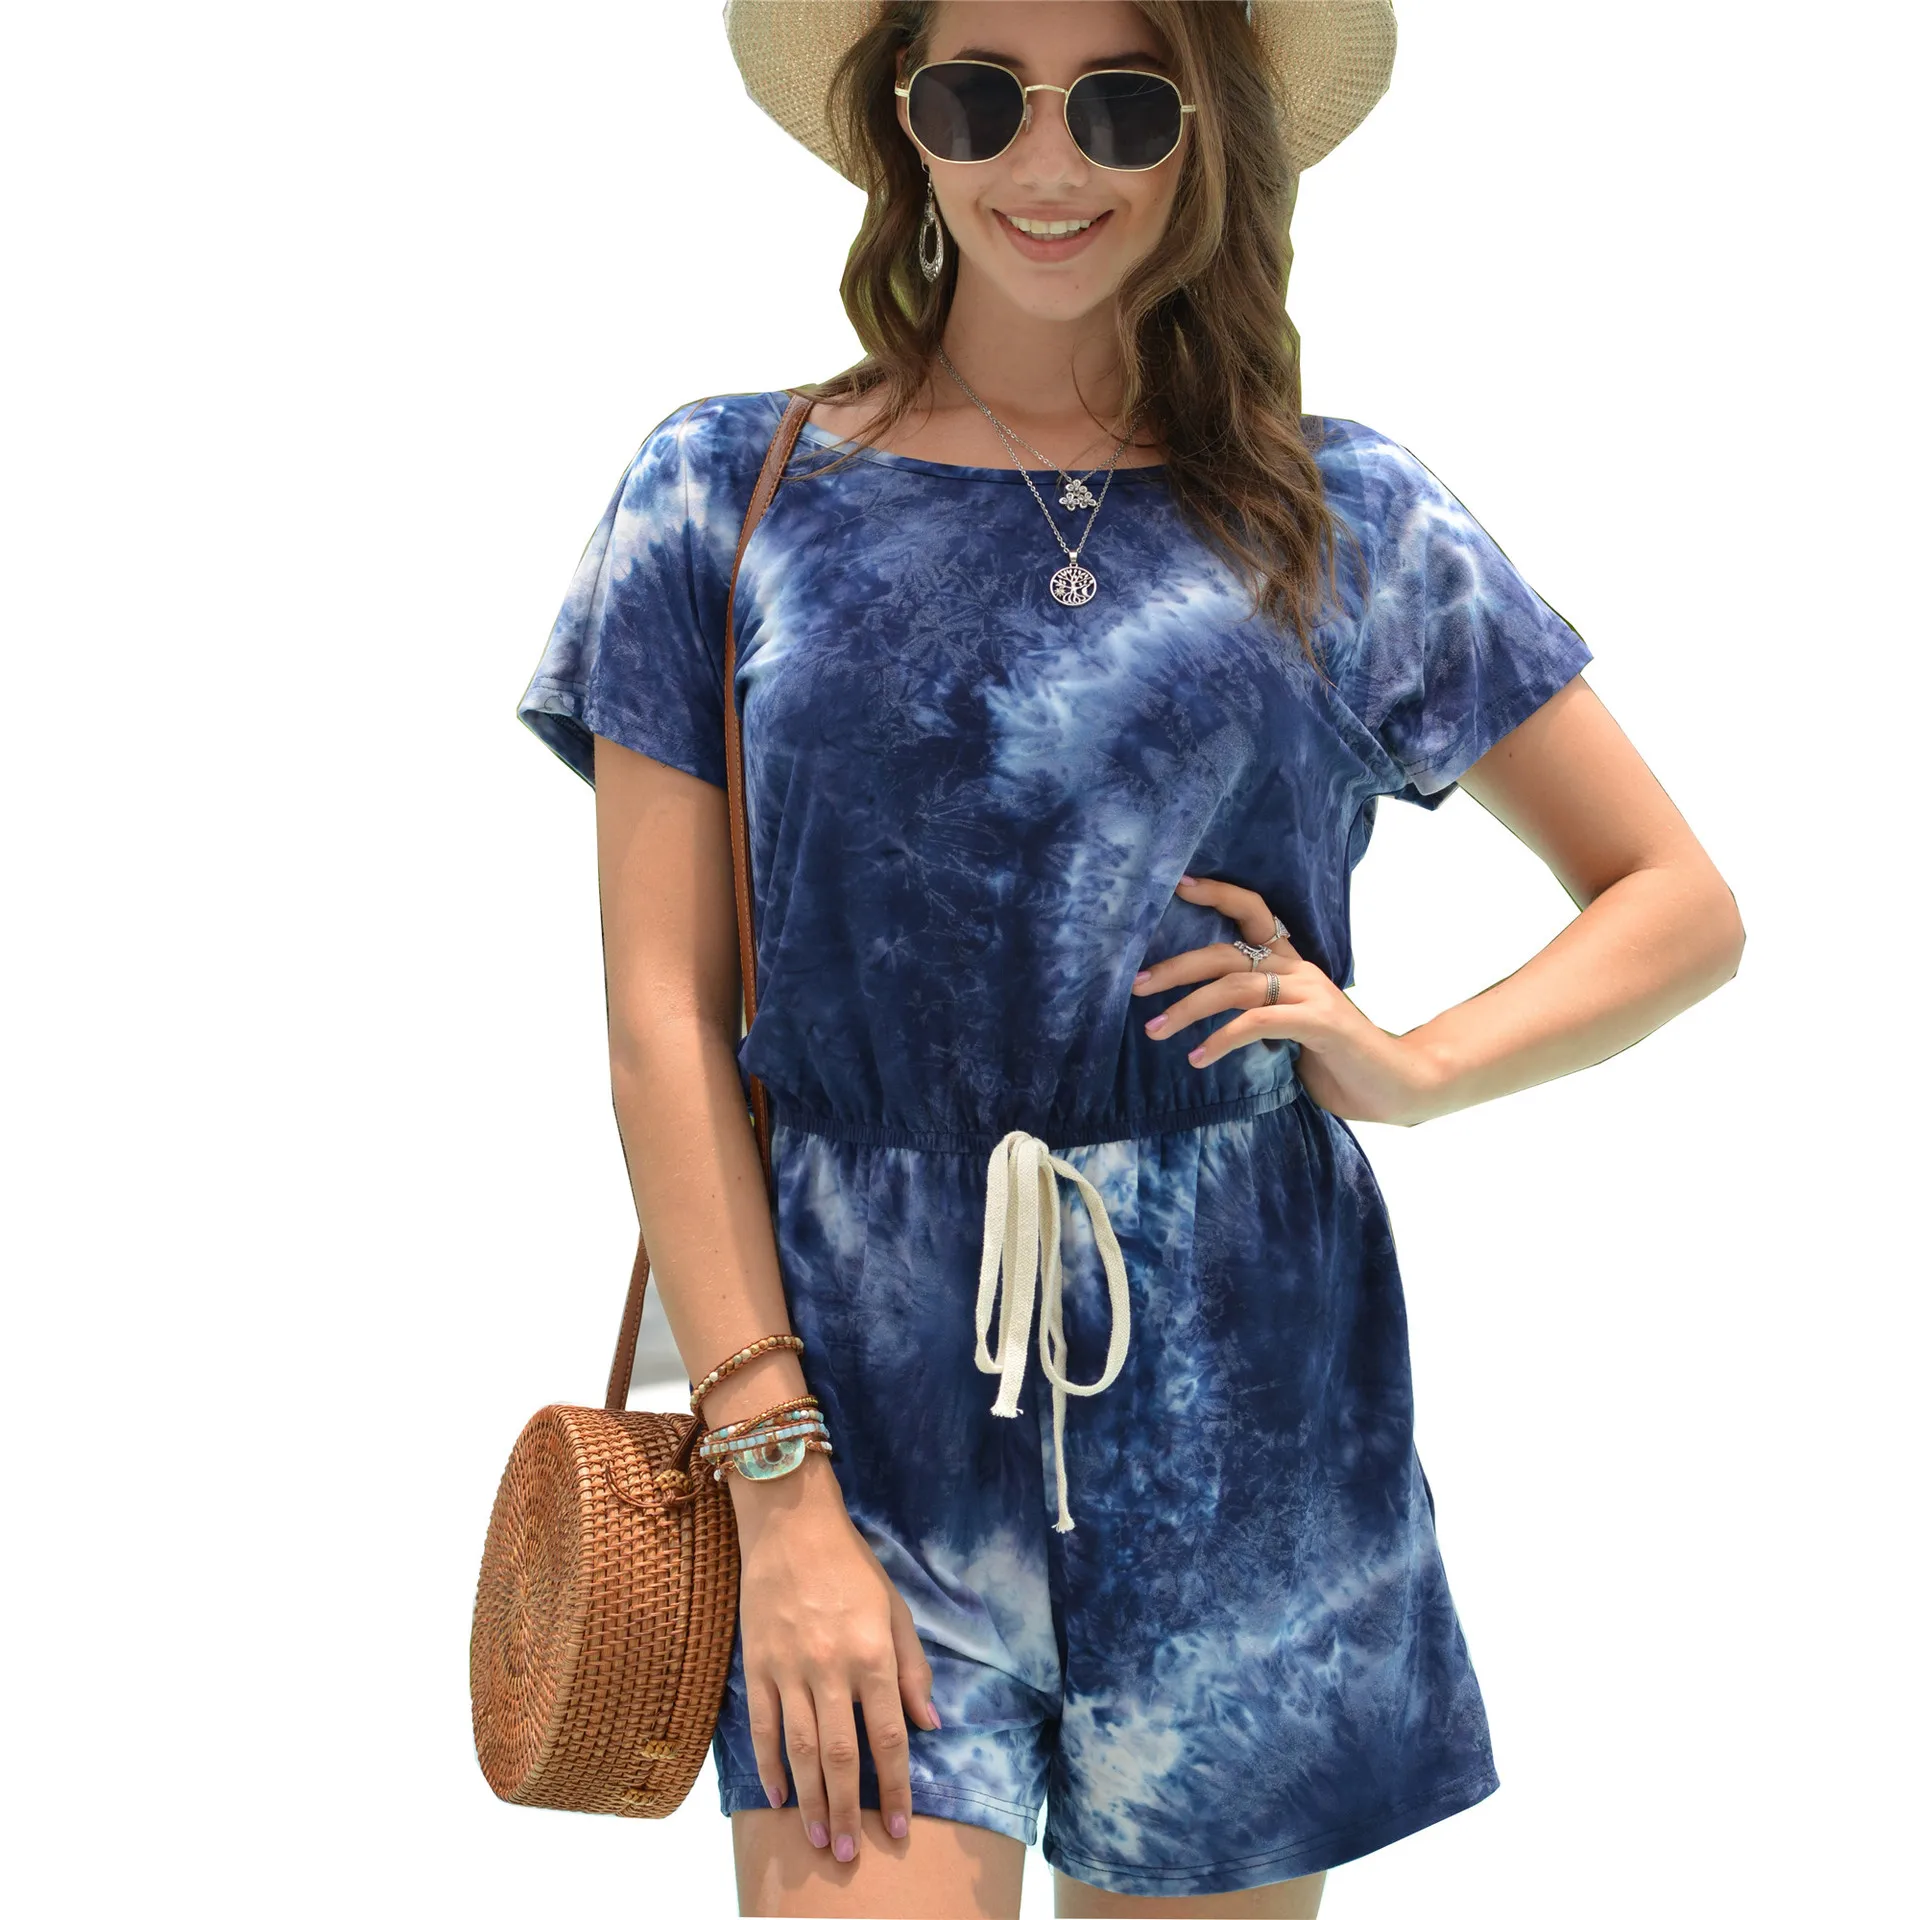 

Women's Round Neck Short Sleeve Fashion Drawstring Short Tie Dyed Jumpsuit, As show